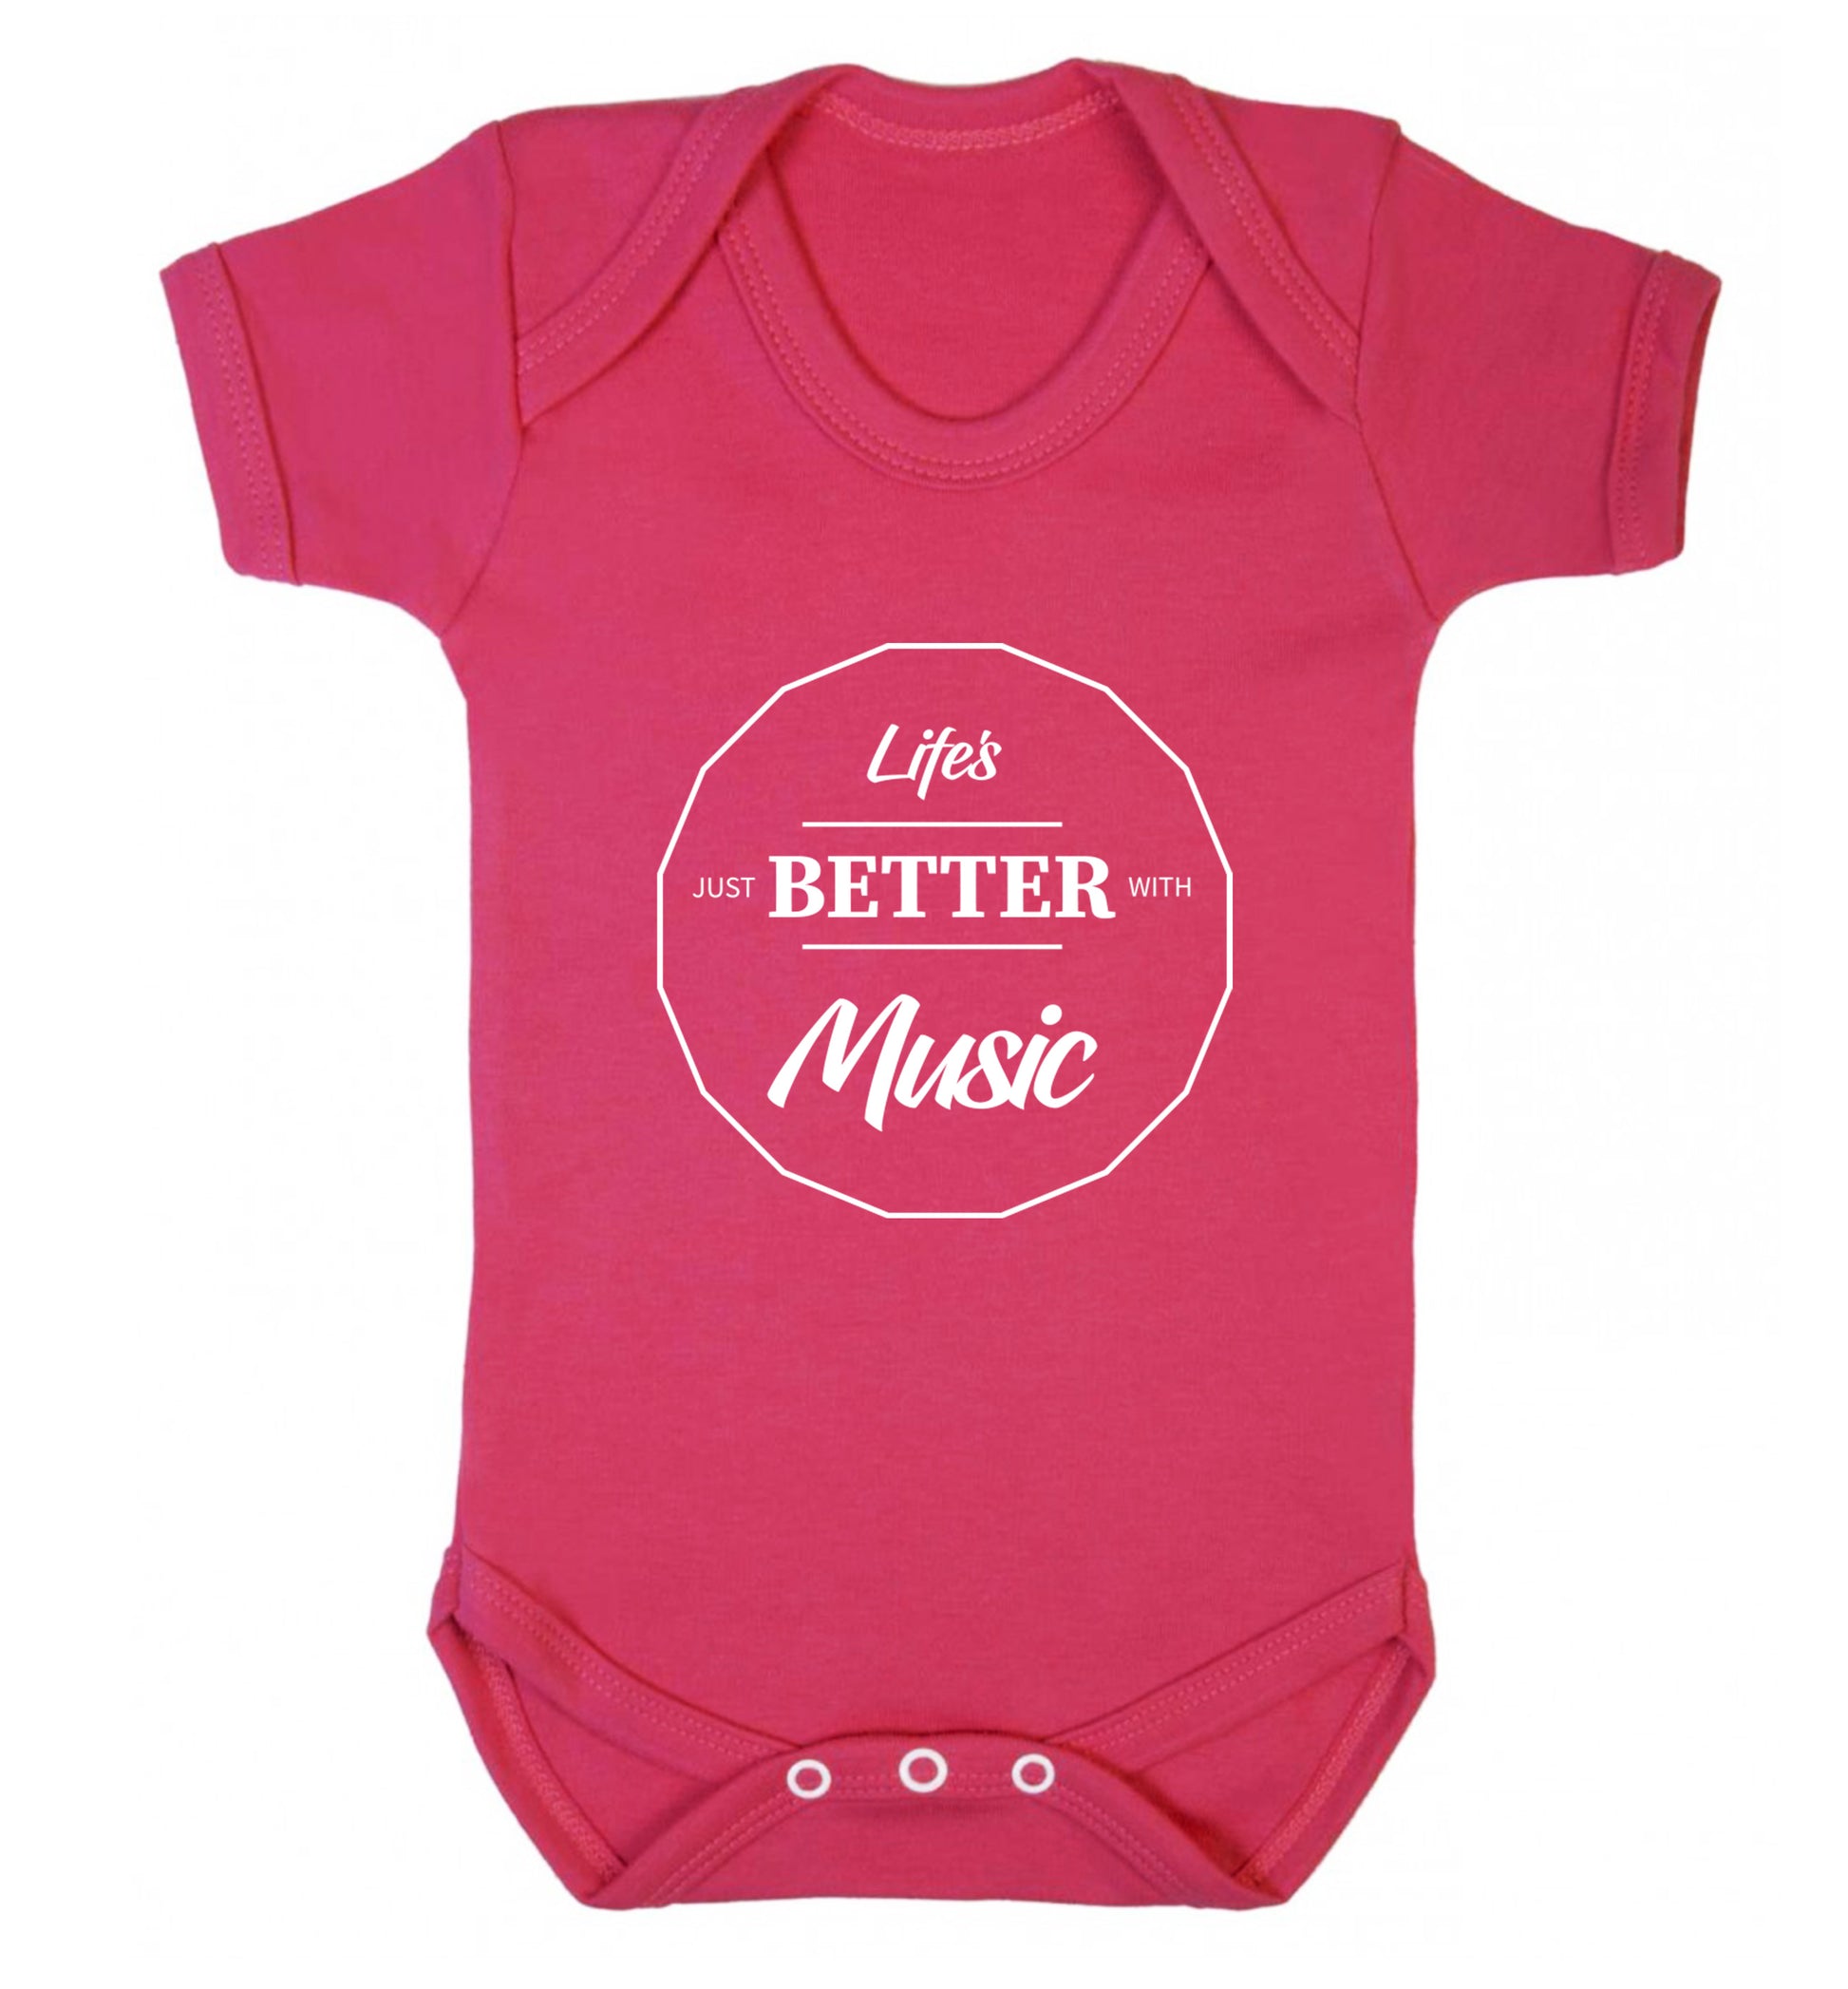 Life is Better With Music Baby Vest dark pink 18-24 months